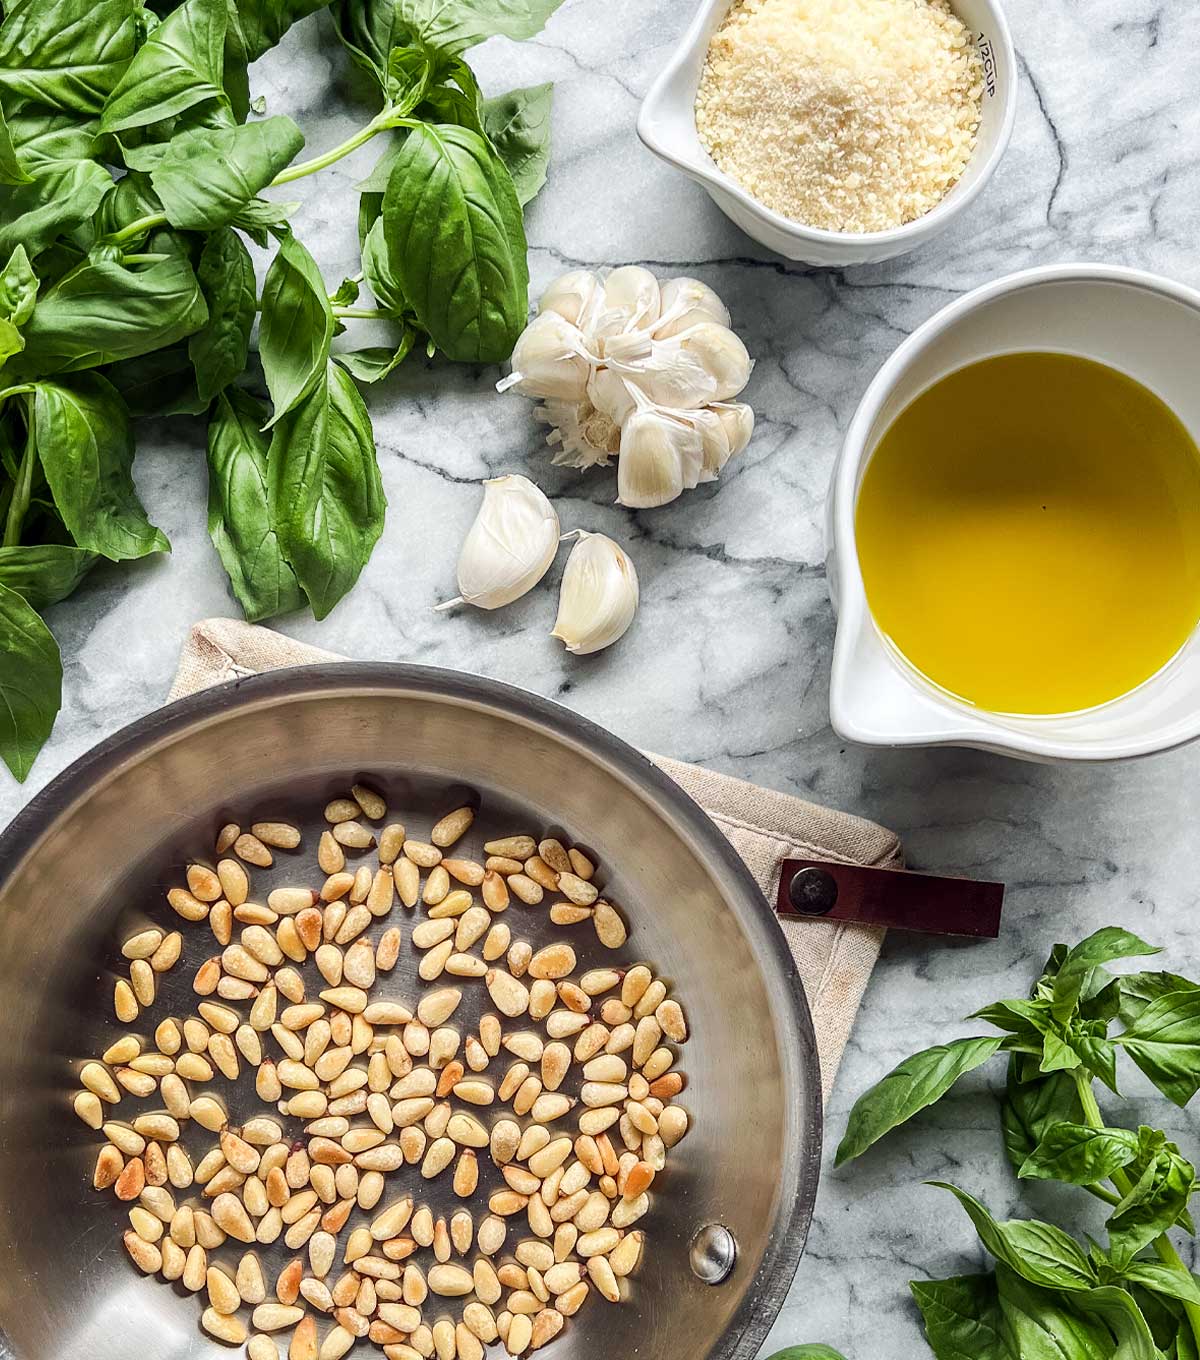 A marble board with fresh basil, pinenuts, garlic, parmesan cheese, and a bowl of extra virgin olive oil.